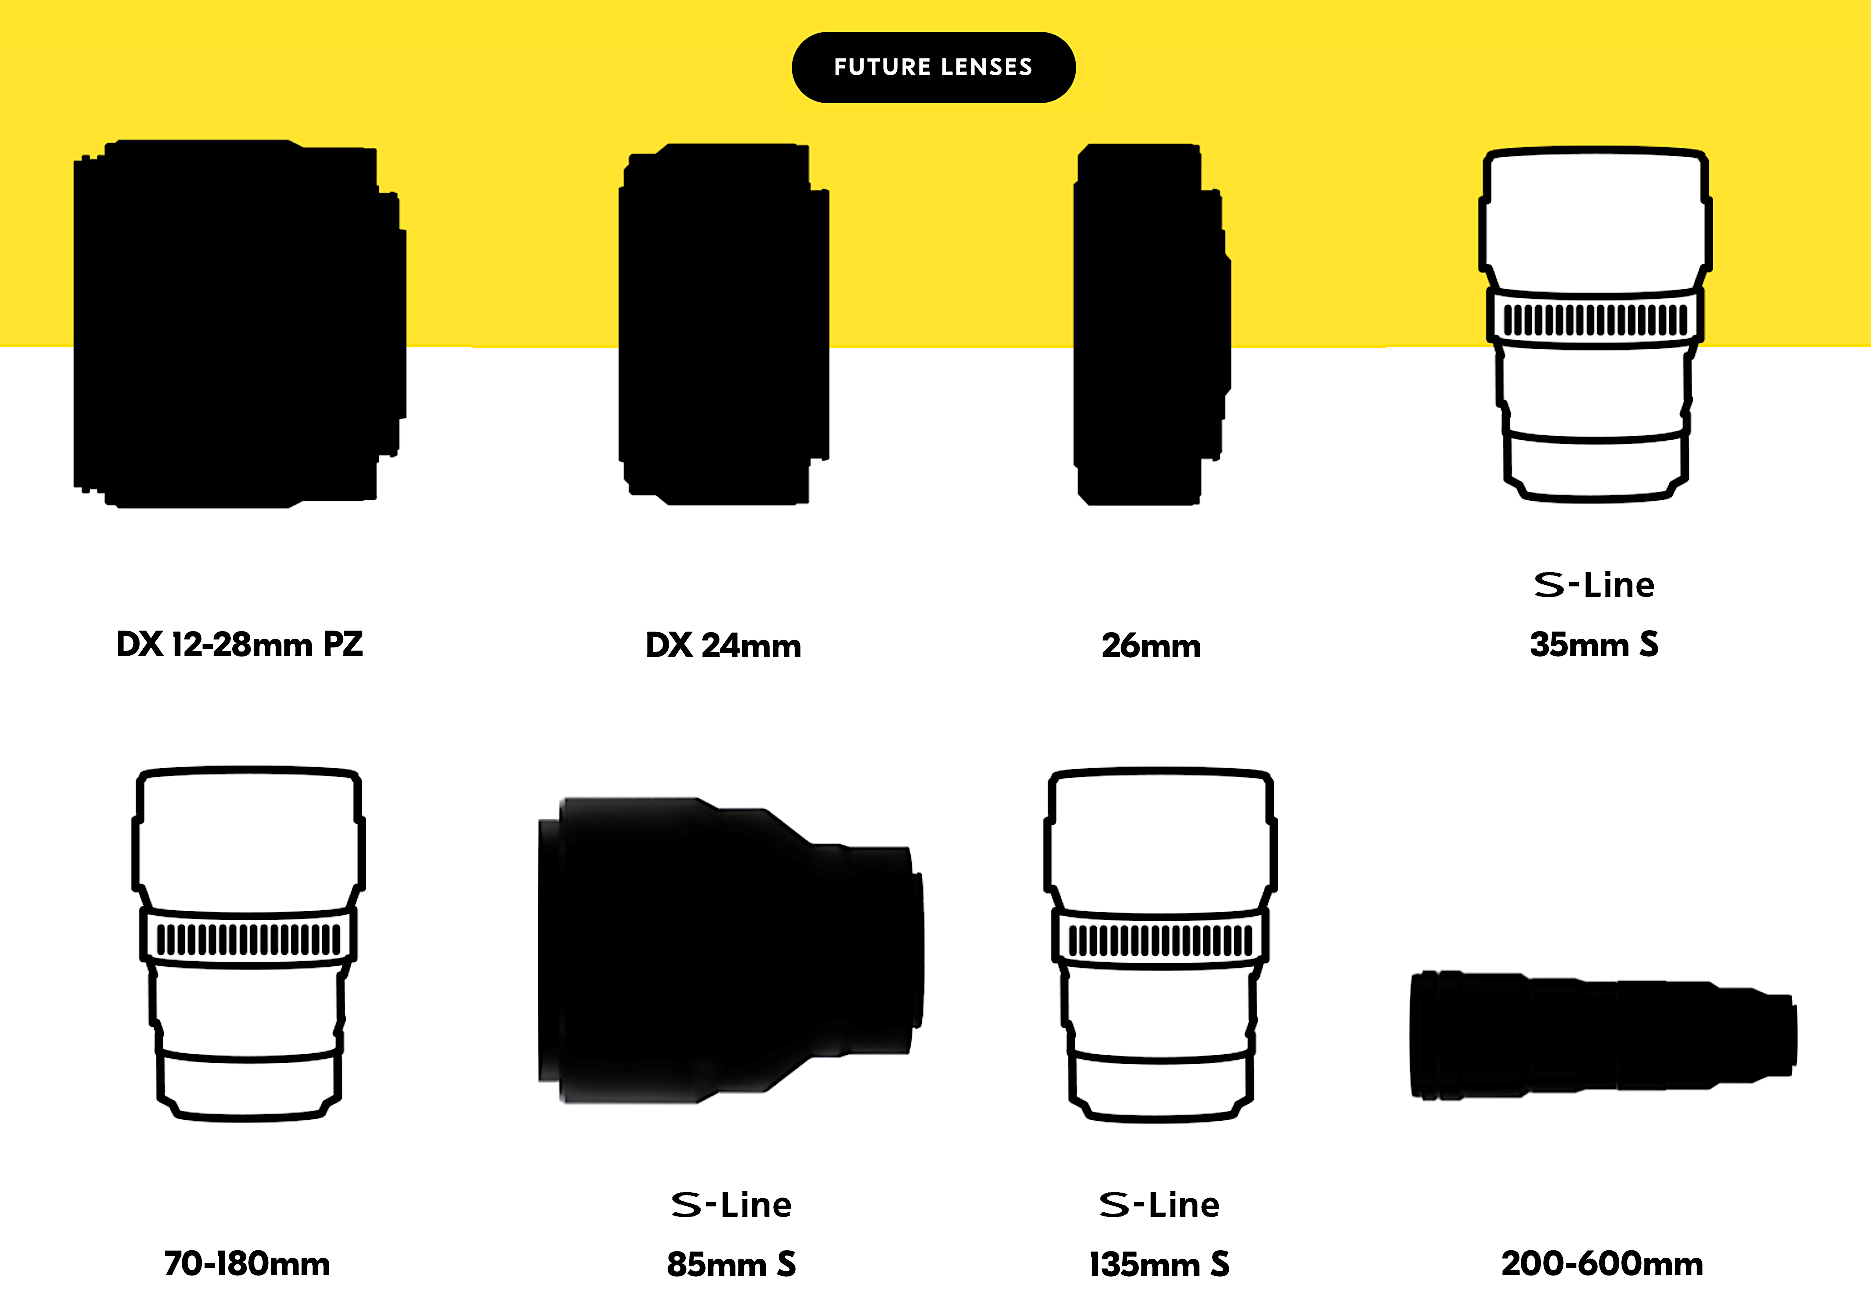 Nikon is expected to release eight new Z lenses in 2023 Nikon Rumors